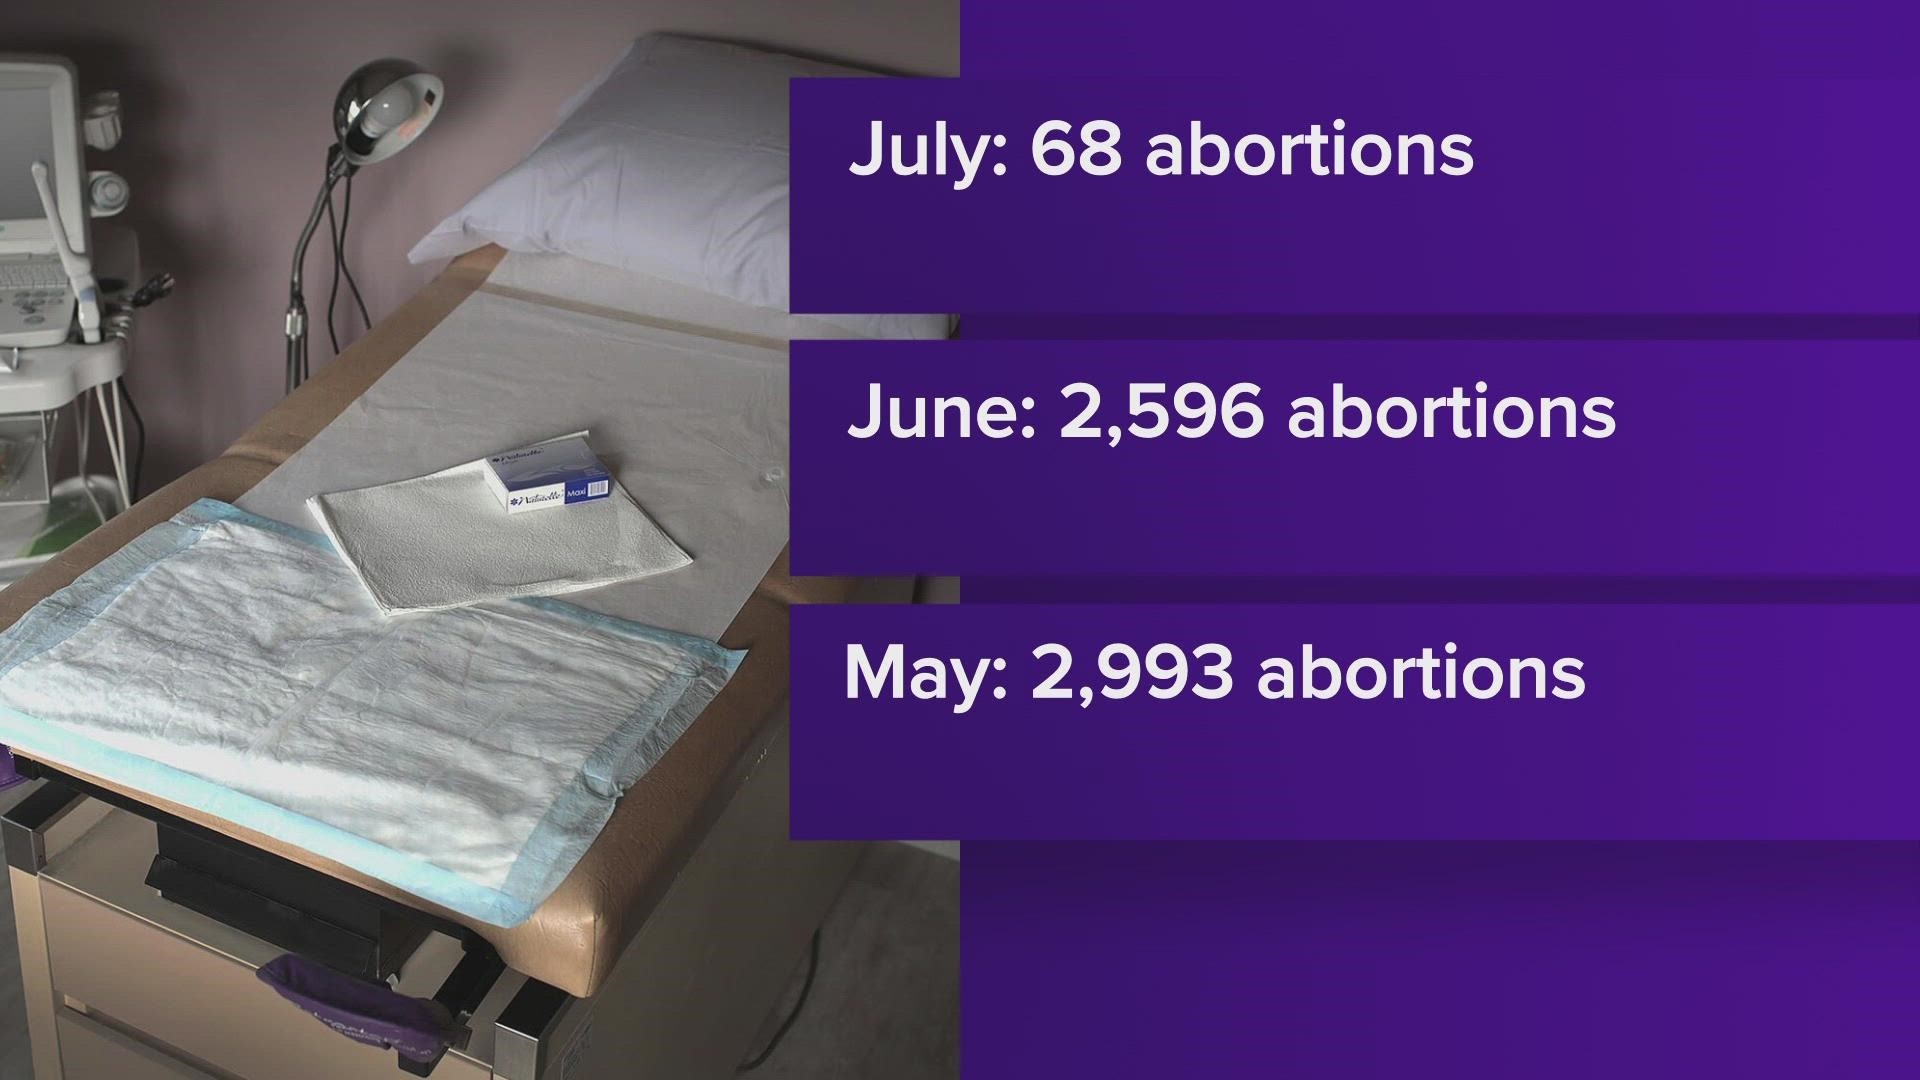 Prior to the SCOTUS decision but following the implementation of the state's so-called "Heartbeat Act," thousands of abortions were still being performed in Texas.